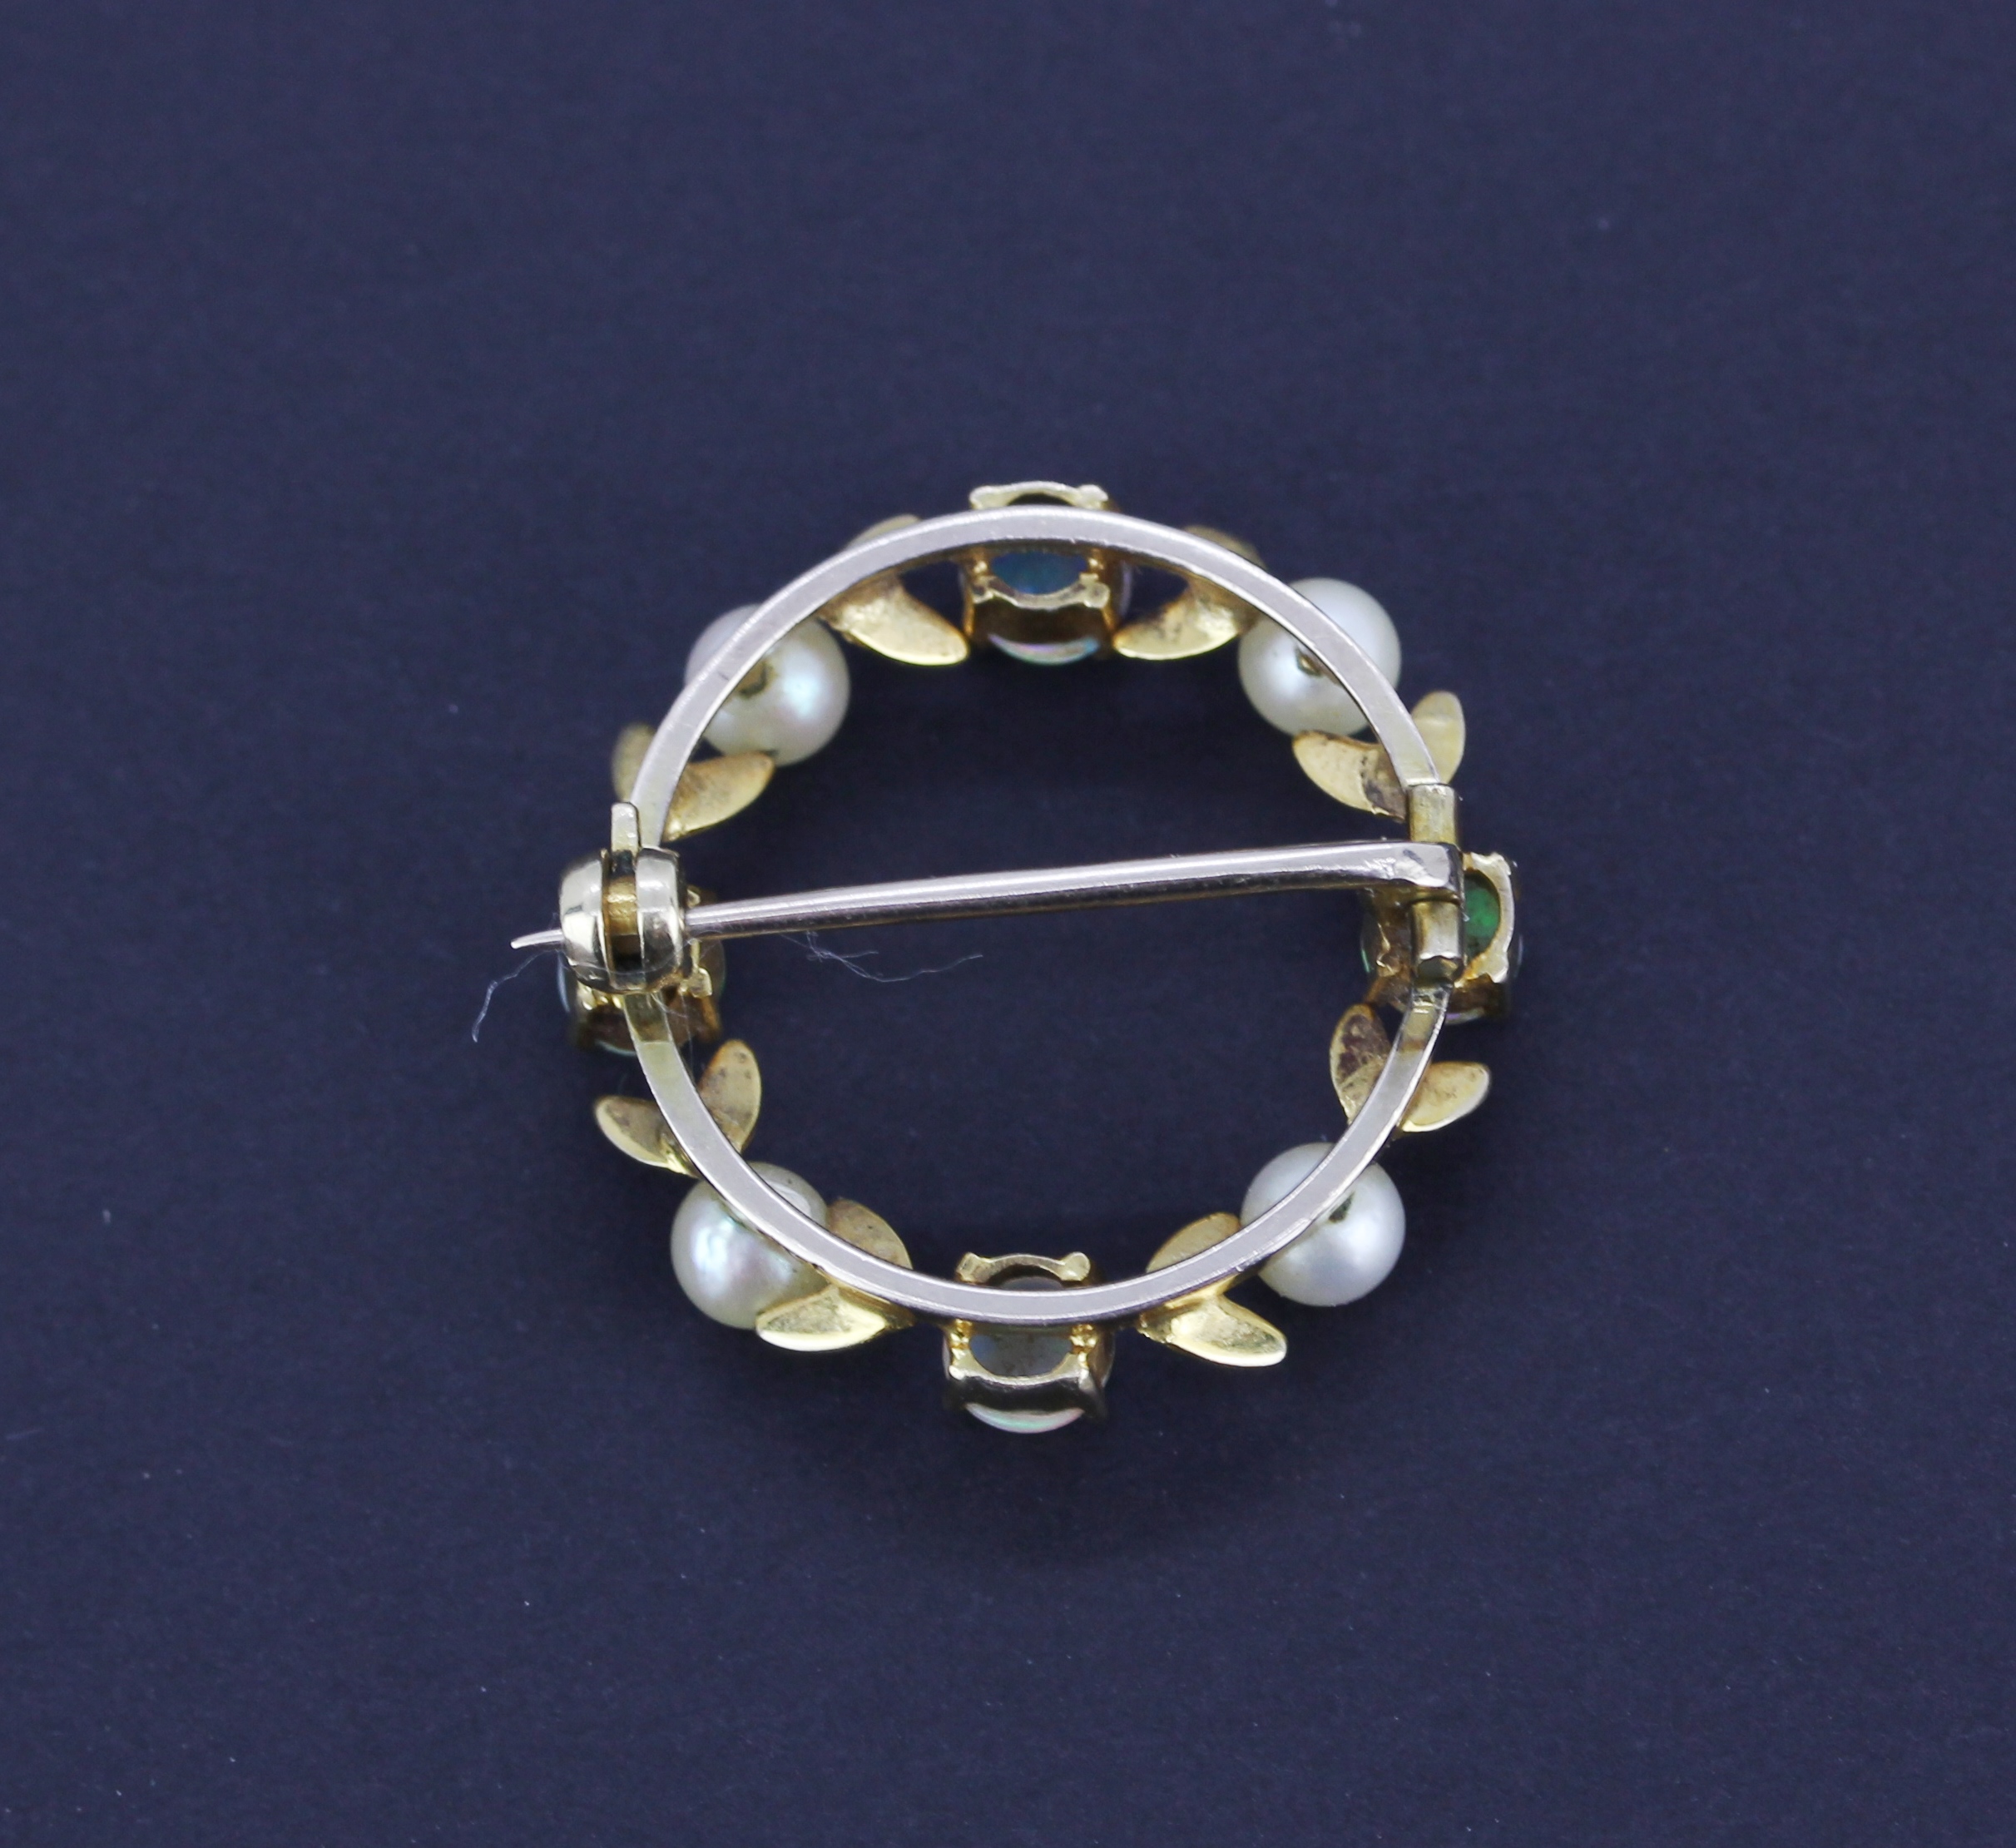 A 9ct yellow gold brooch set with round cabochon cut opals and pearls, dia. 2.5cm. - Image 2 of 2